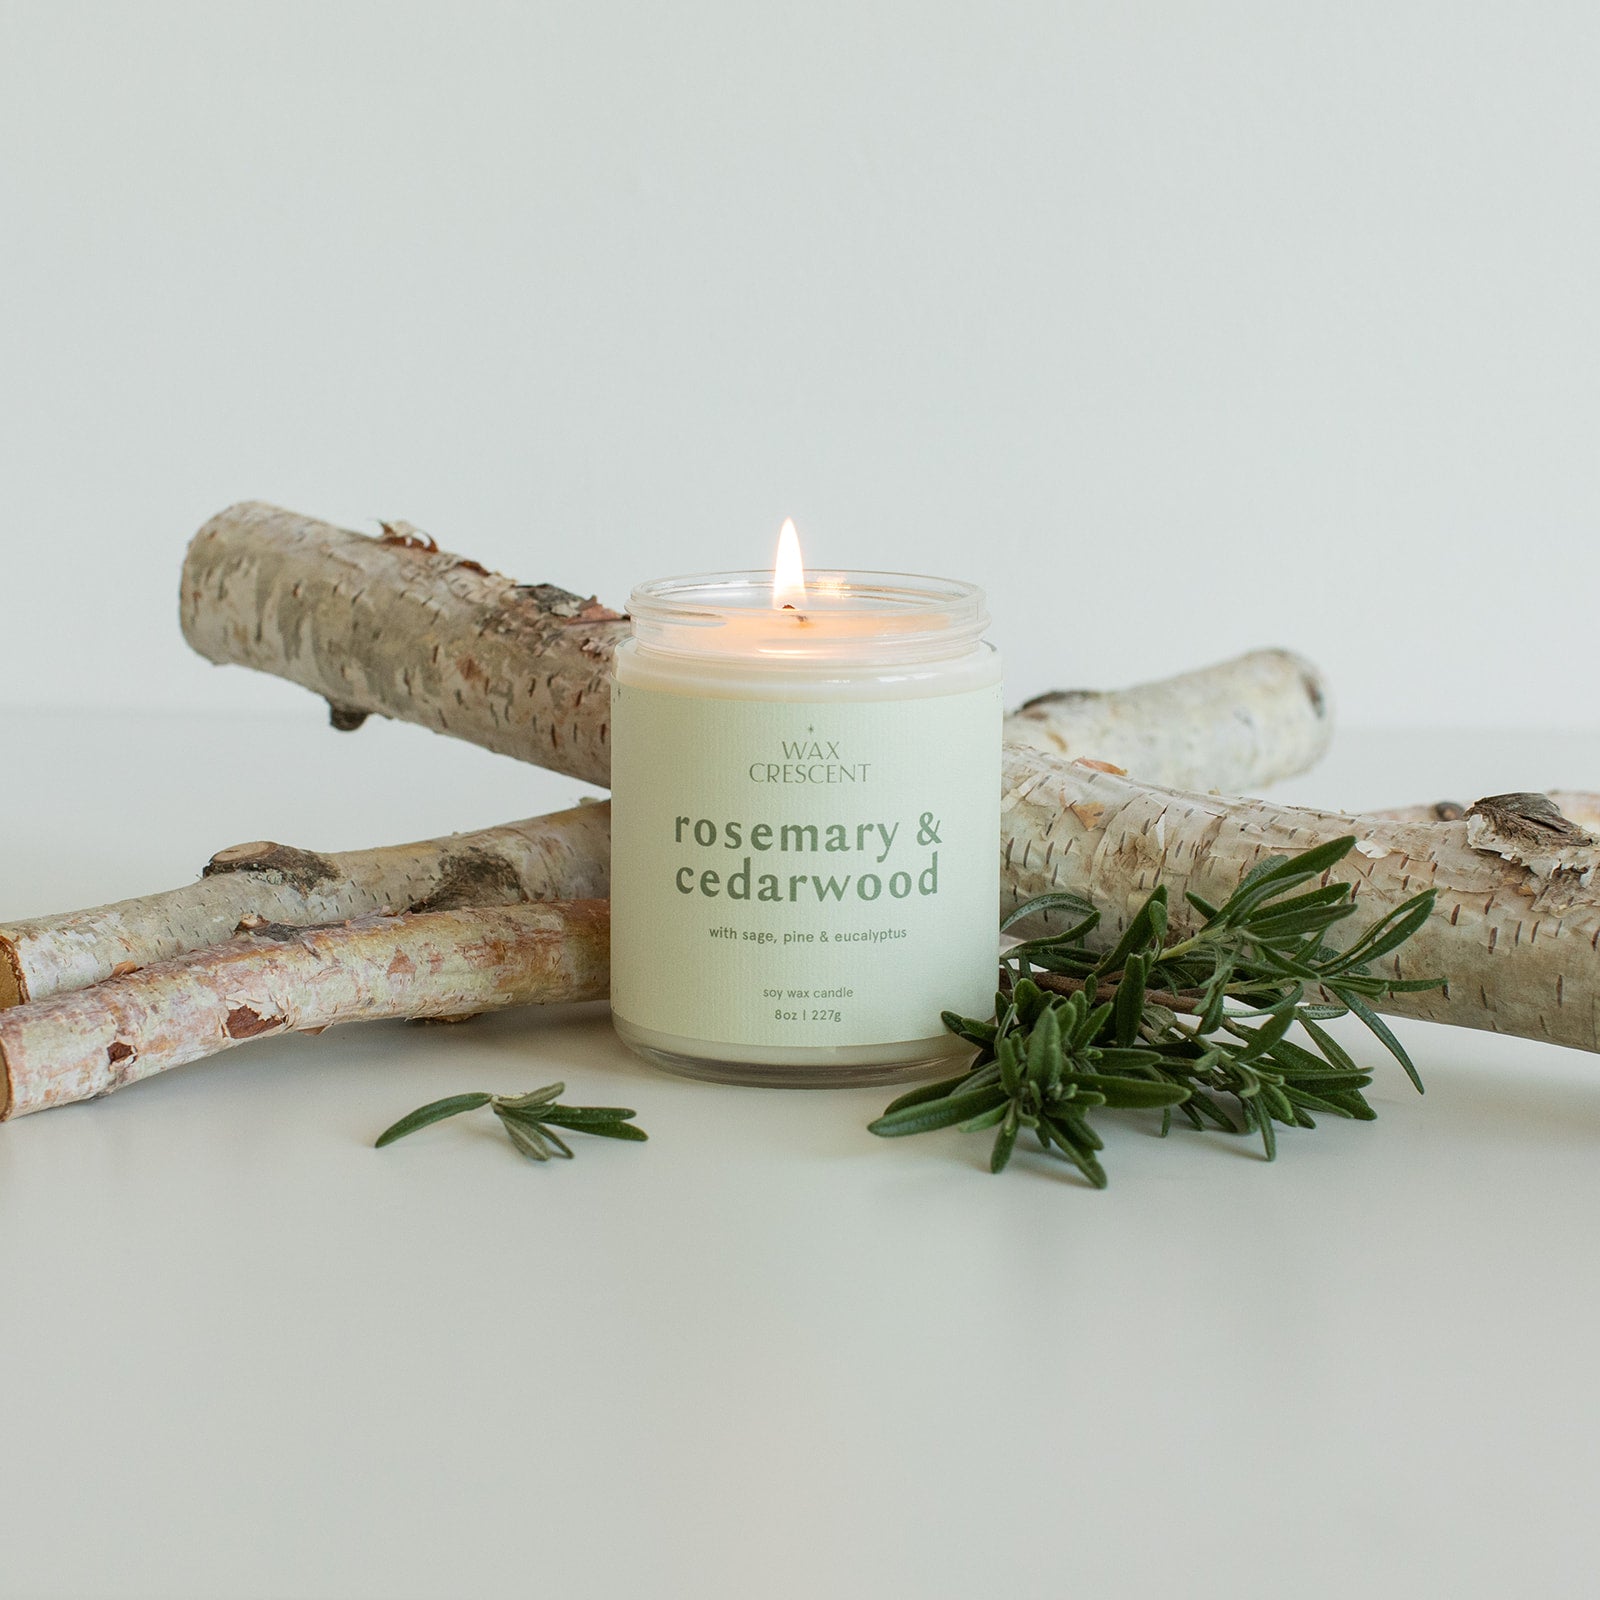 rosemary and cedarwood soy wax candle hand-poured in Longmont, Colorado just outside of Boulder using non-toxic and sustainable ingredients. for the most natural luxury home decor. 